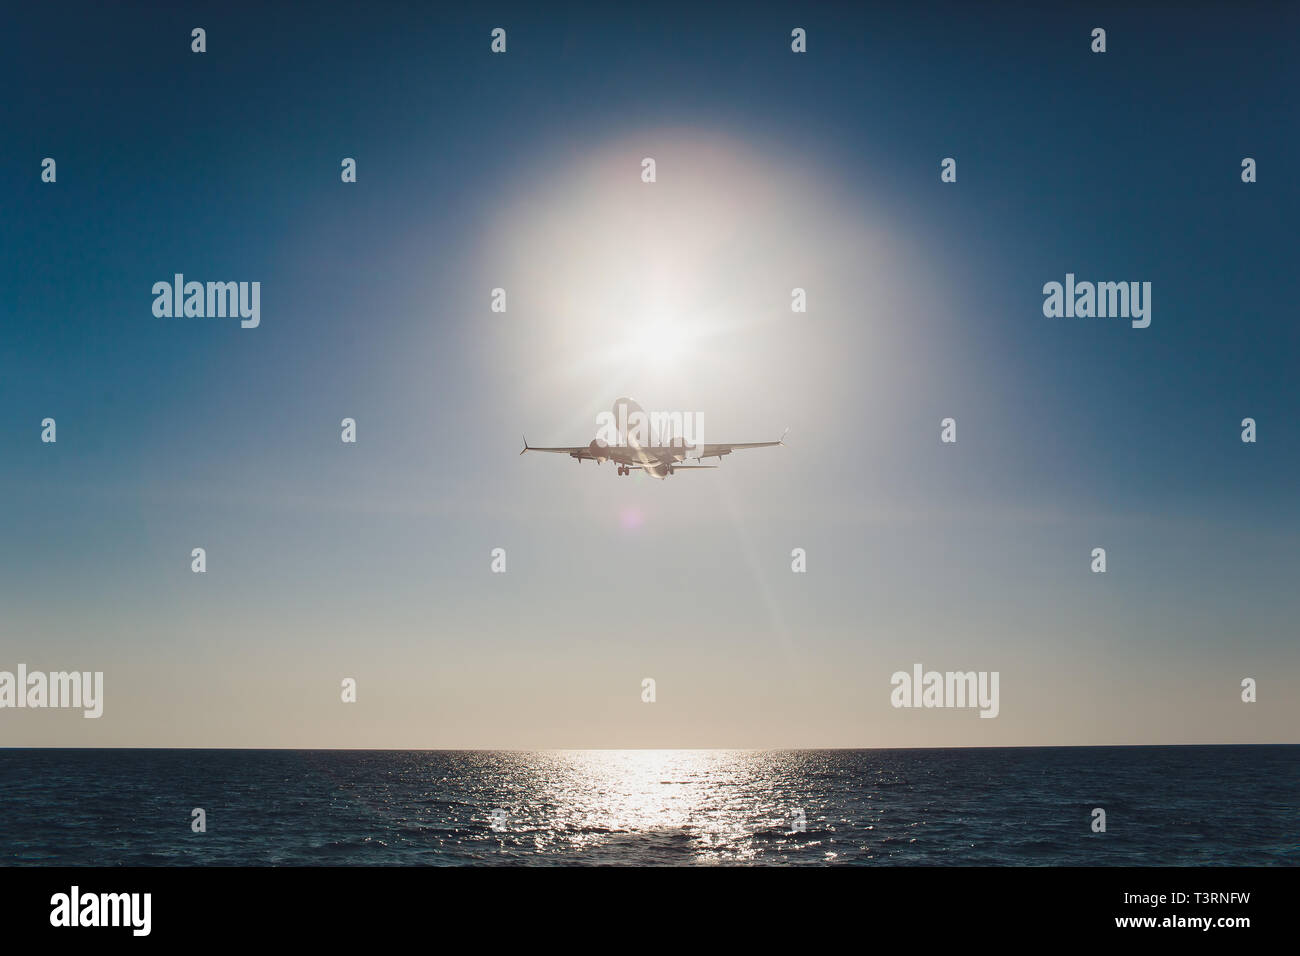 Airplane flying under blue sky and white cloud in Phuket, Thailand. Stock Photo